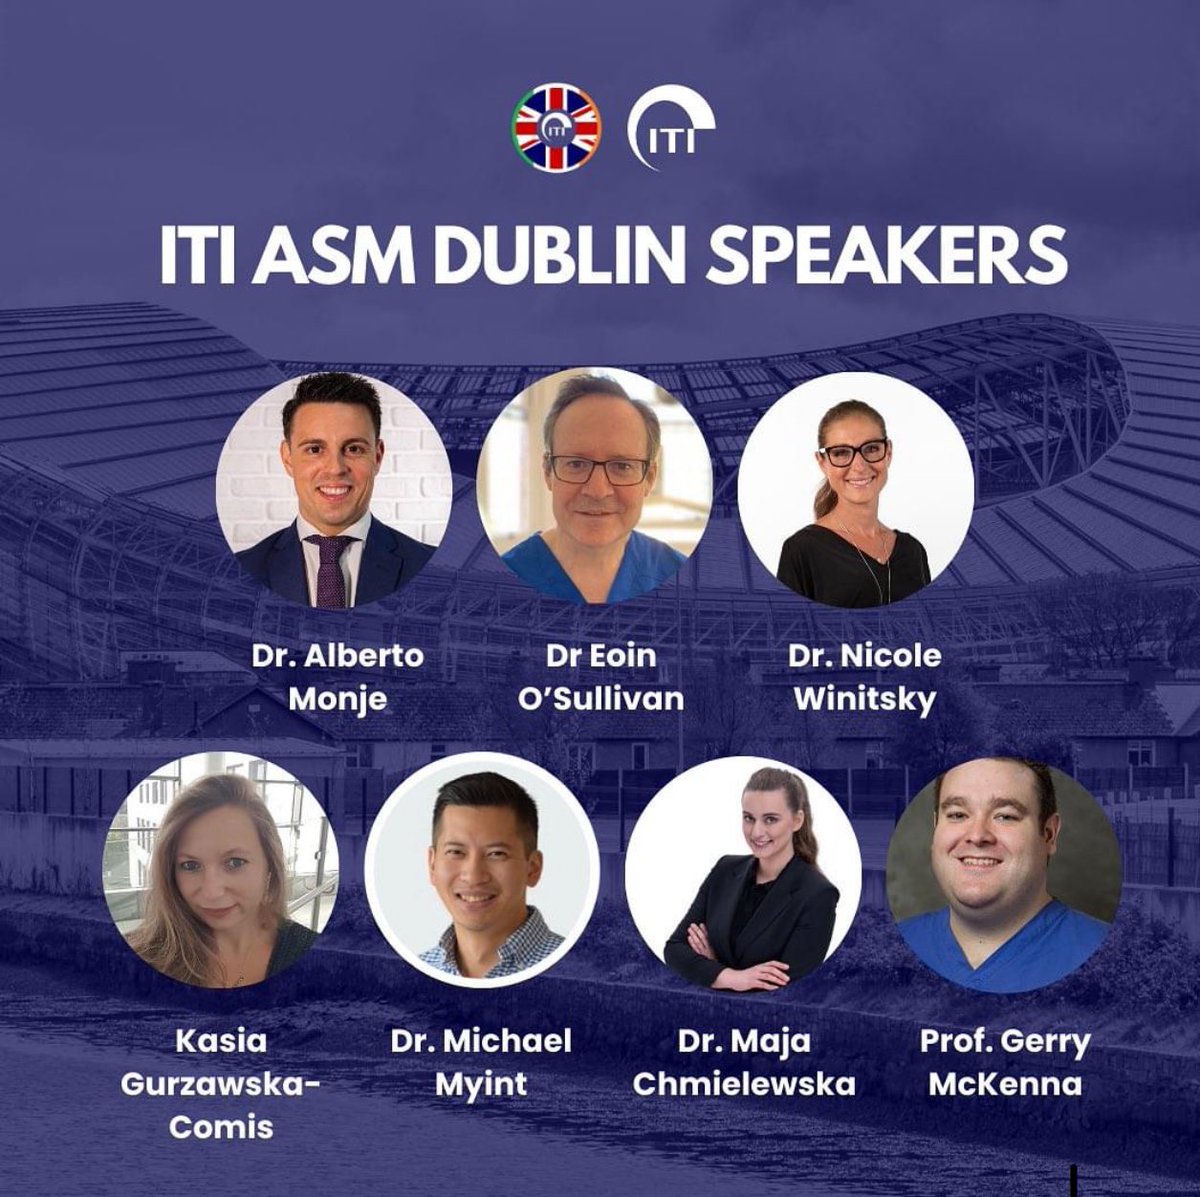 Looking forward to speaking at the @ITIUKIRELAND Annual Scientific Meeting 2024 @AVIVAStadium Dublin on 19th April. Probably as close as I’m going to get to pulling on the green jersey for @IrishRugby at this stage! @CPH_QUB @ITI_org @QUB_ARF @QUB_Dentistry @qubengagemhls_d